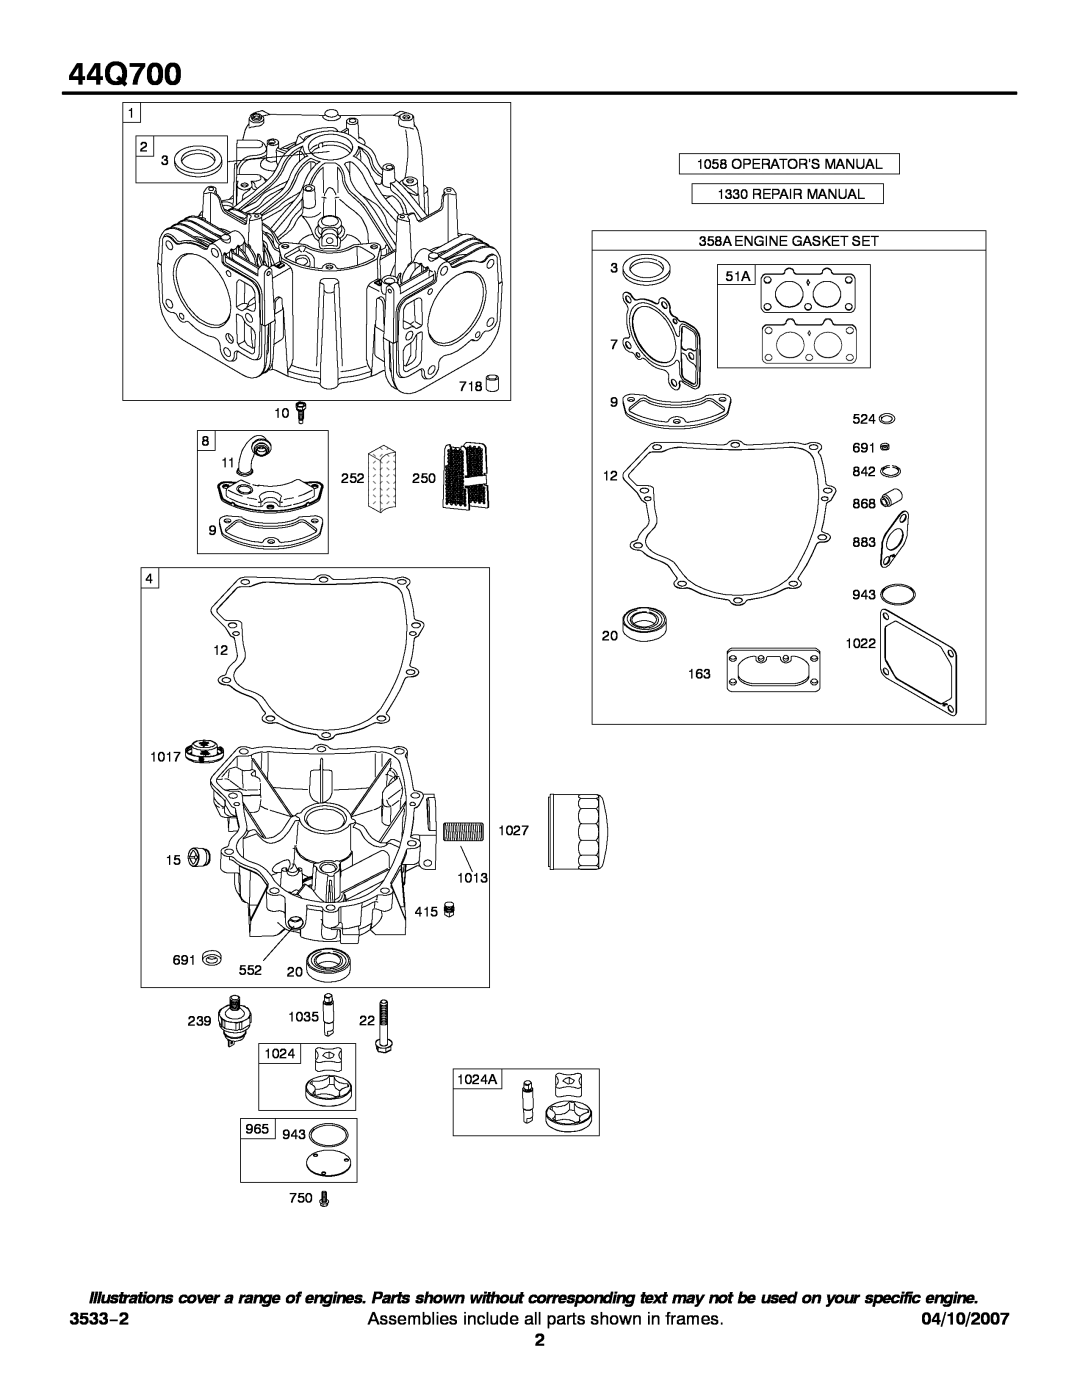 Briggs & Stratton 44Q700 service manual 3533−2, Assemblies include all parts shown in frames, 04/10/2007 